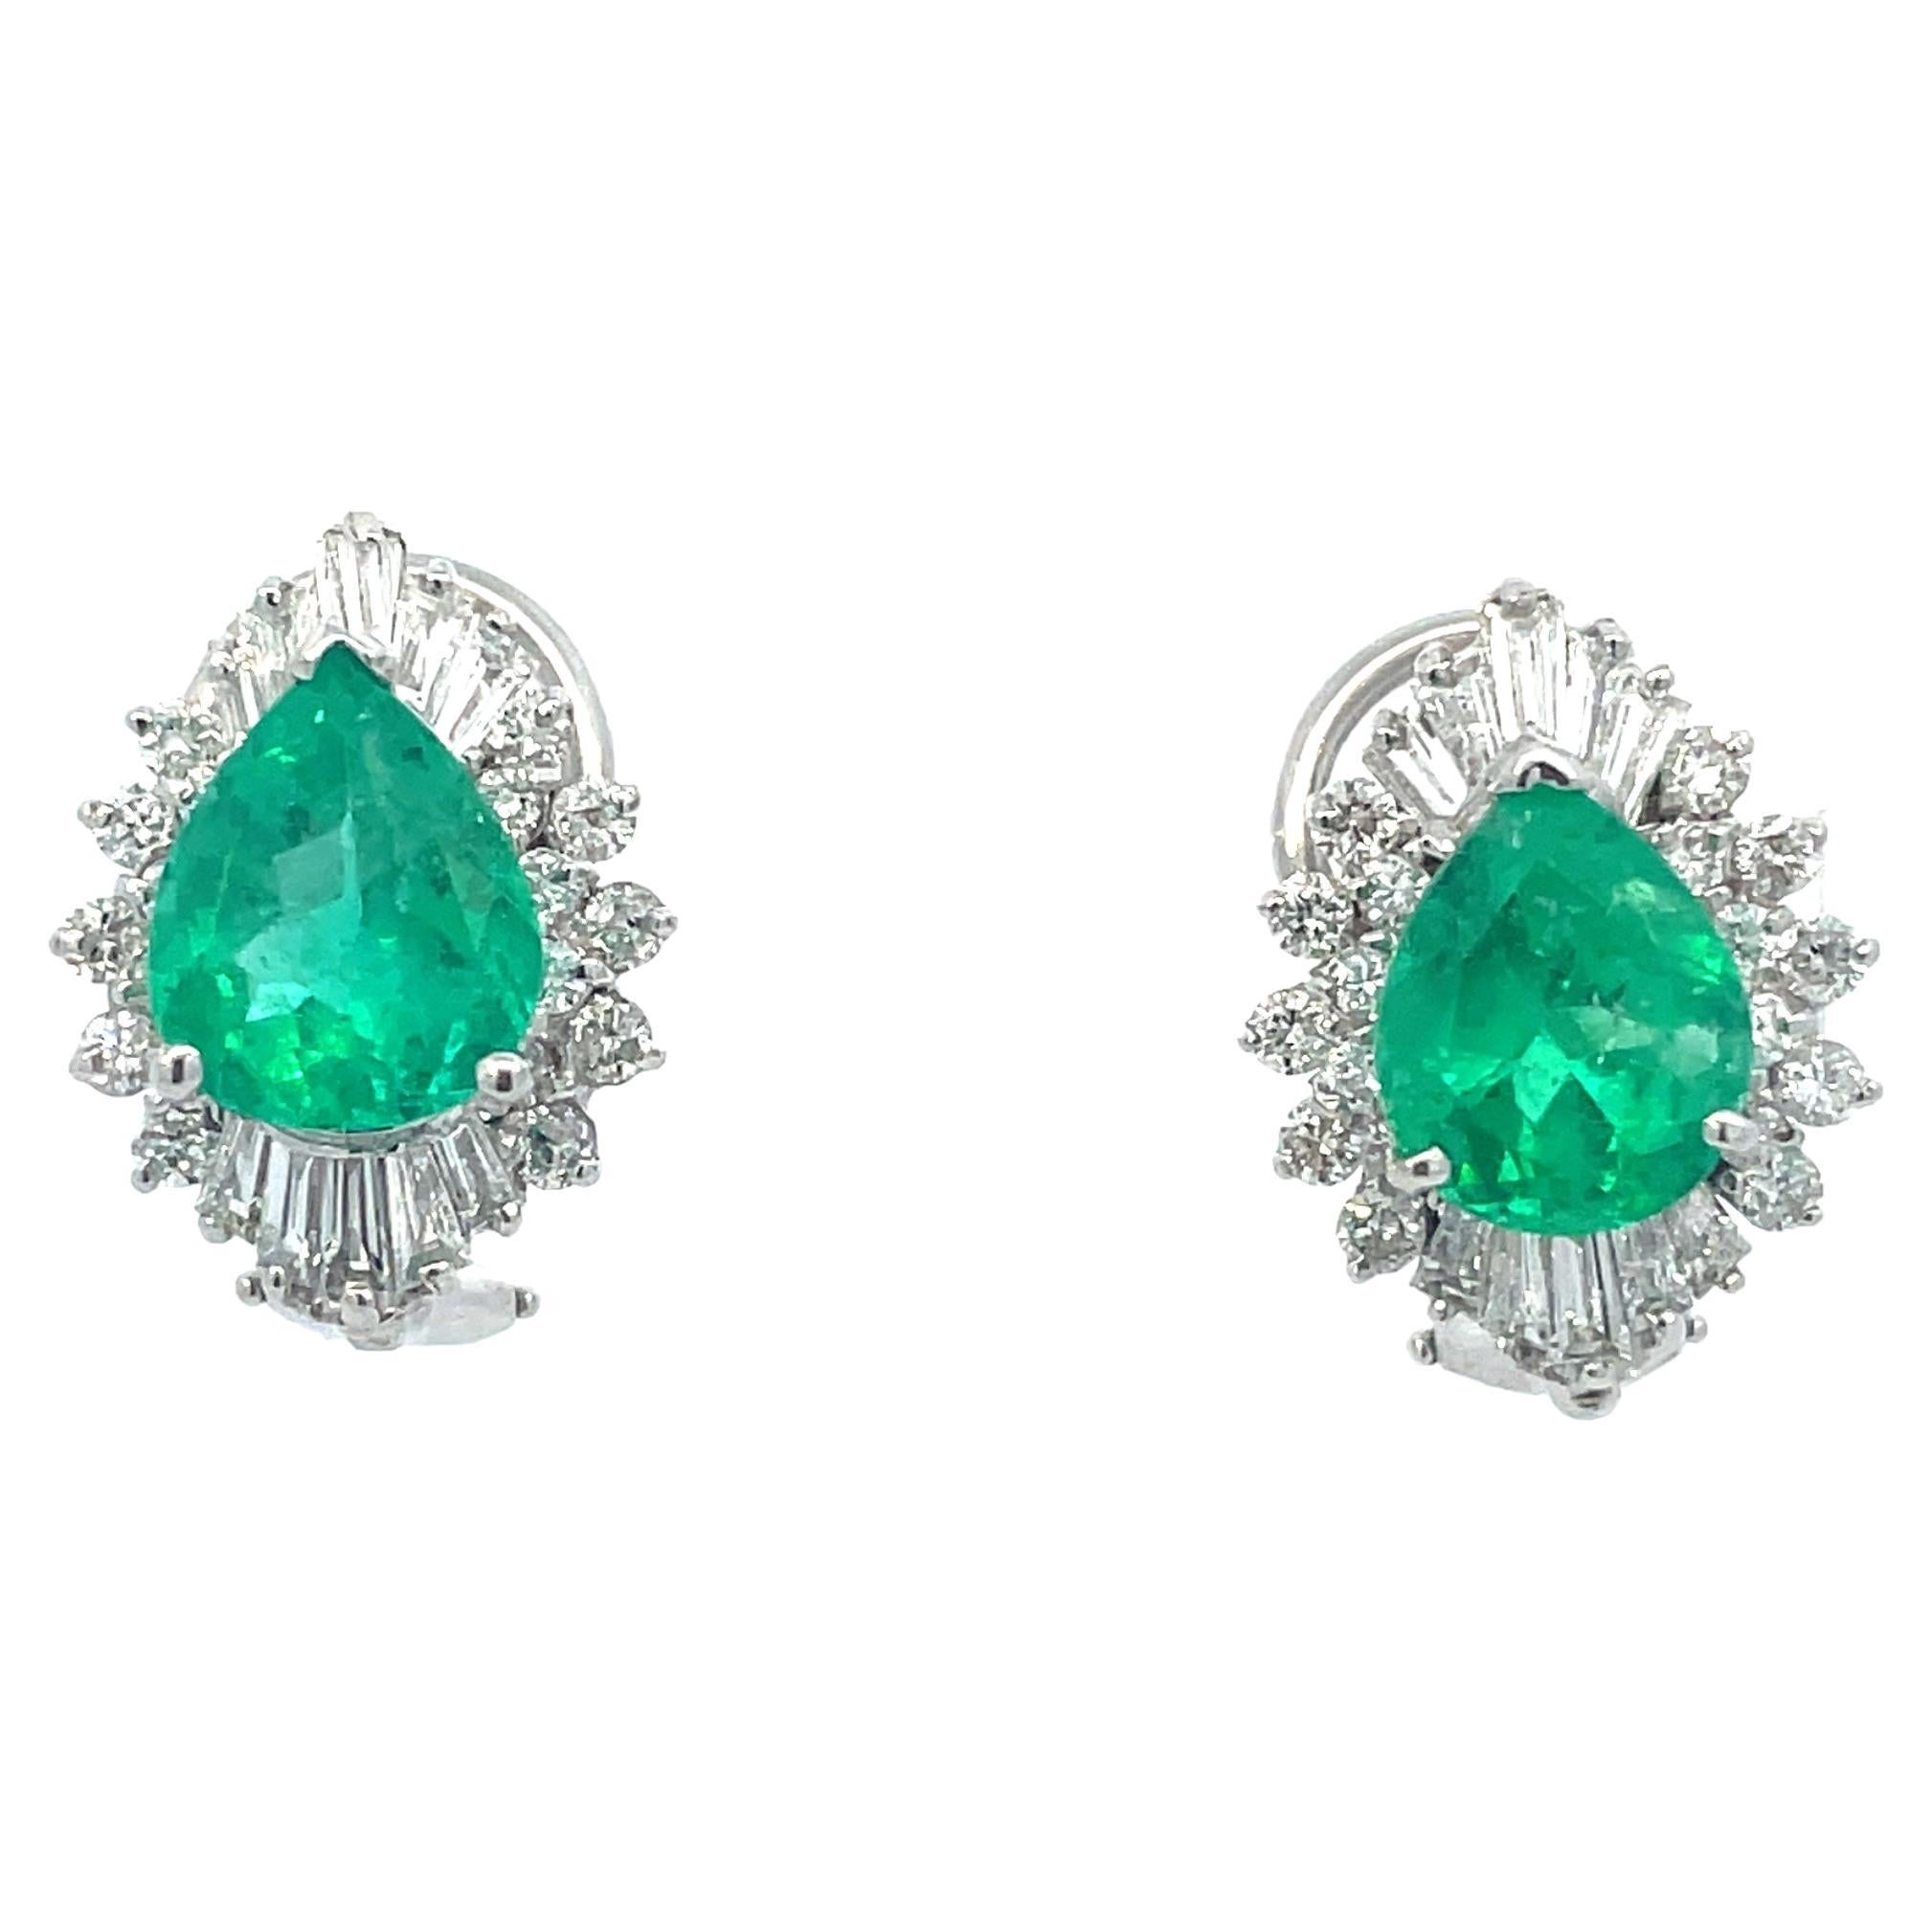 14K White Gold Pear Shaped Emerald and Diamond Earrings with AGL Report